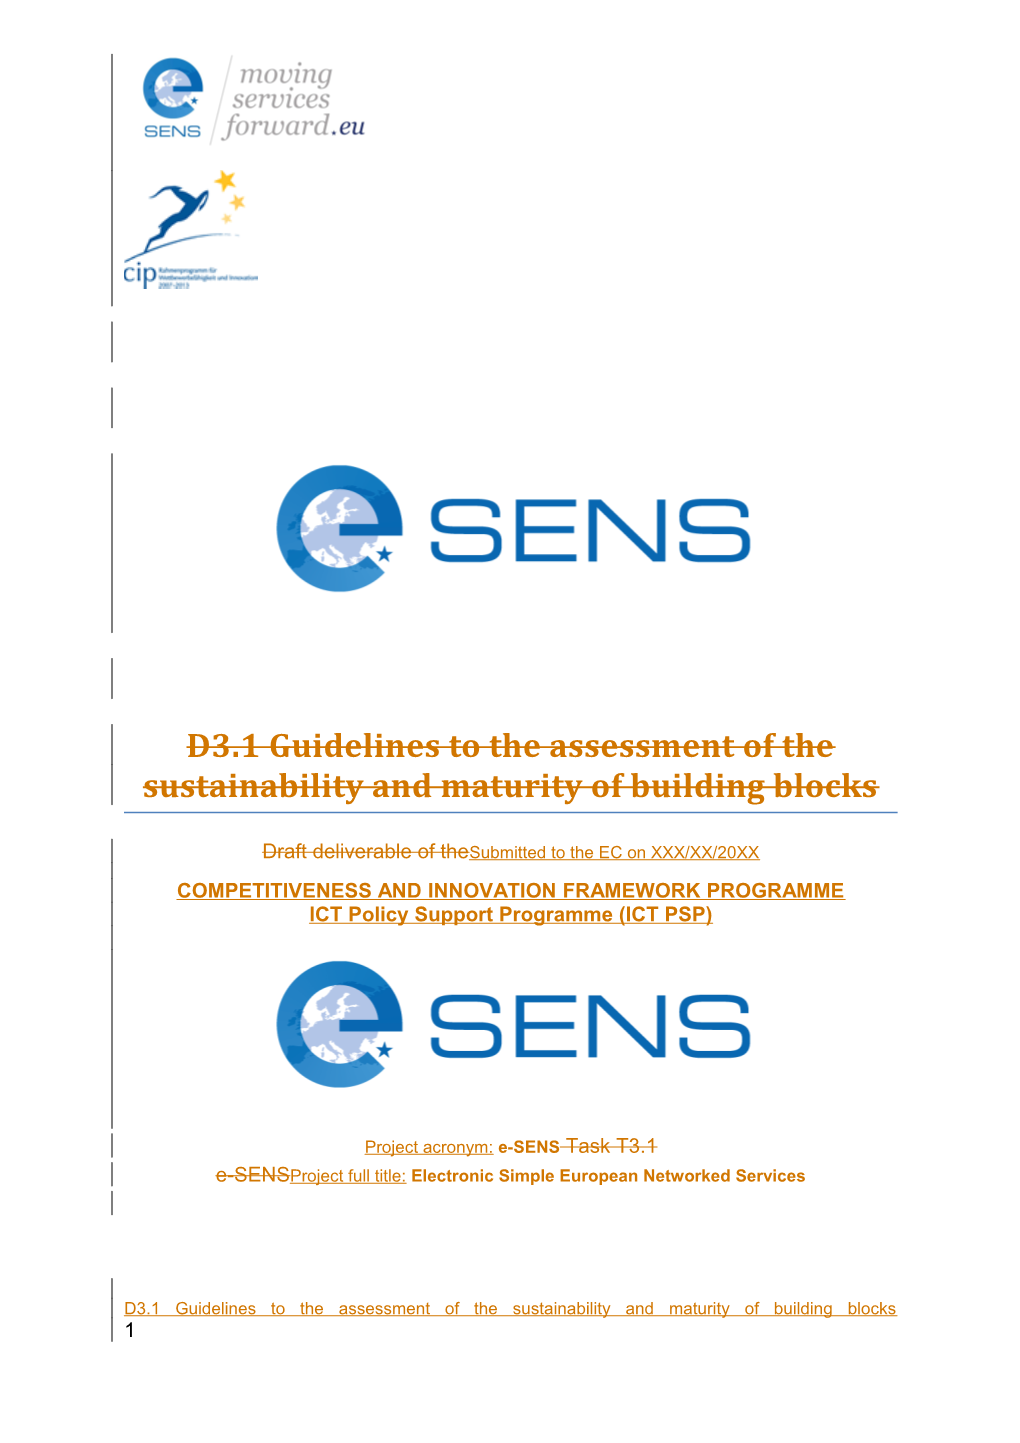 D3.1 Guidelines to the Assessment of the Sustainability and Maturity of Building Blocks